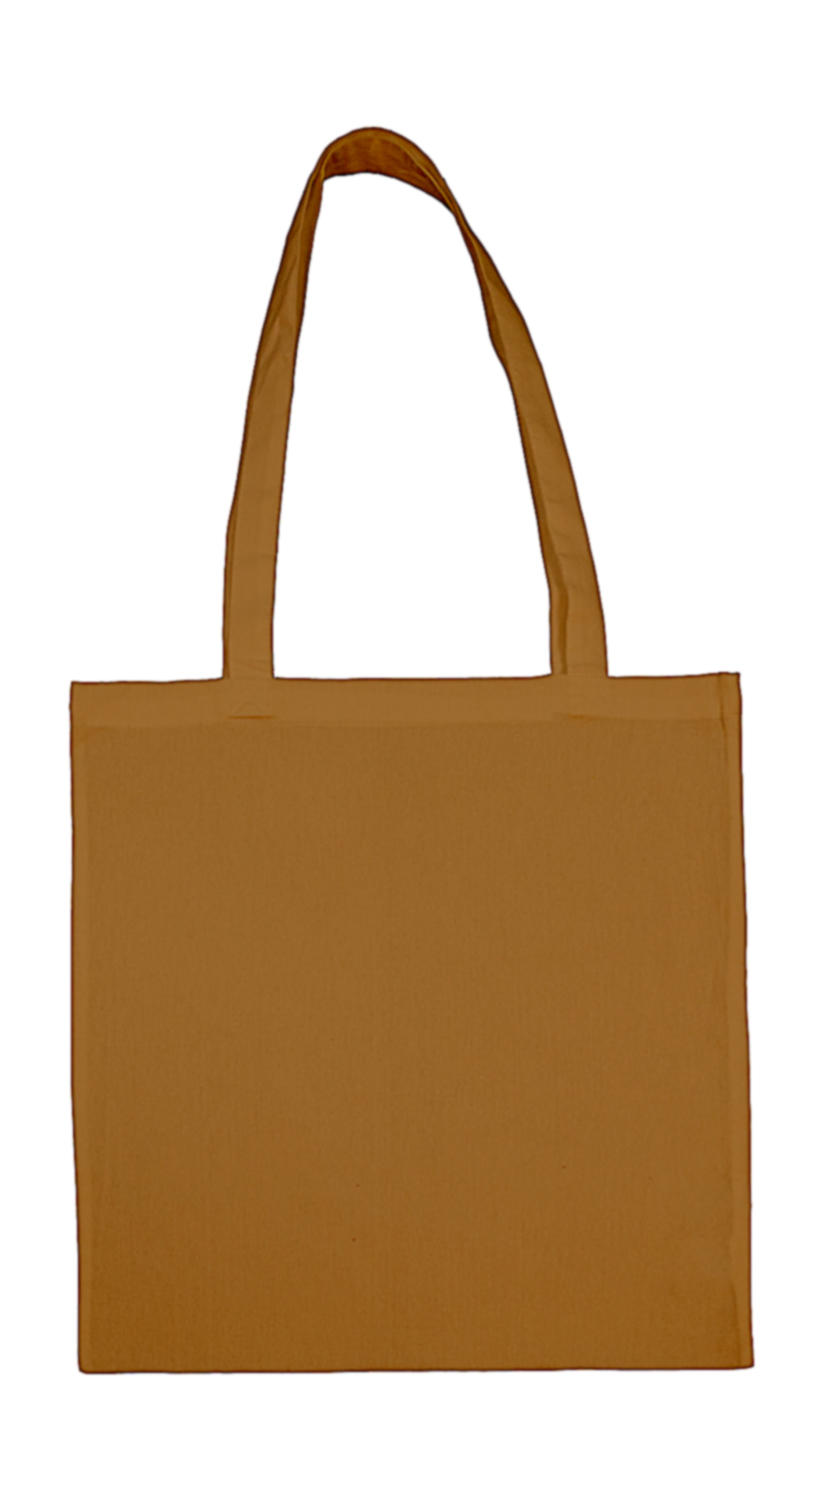  Cotton Bag LH in Farbe Medal Bronze